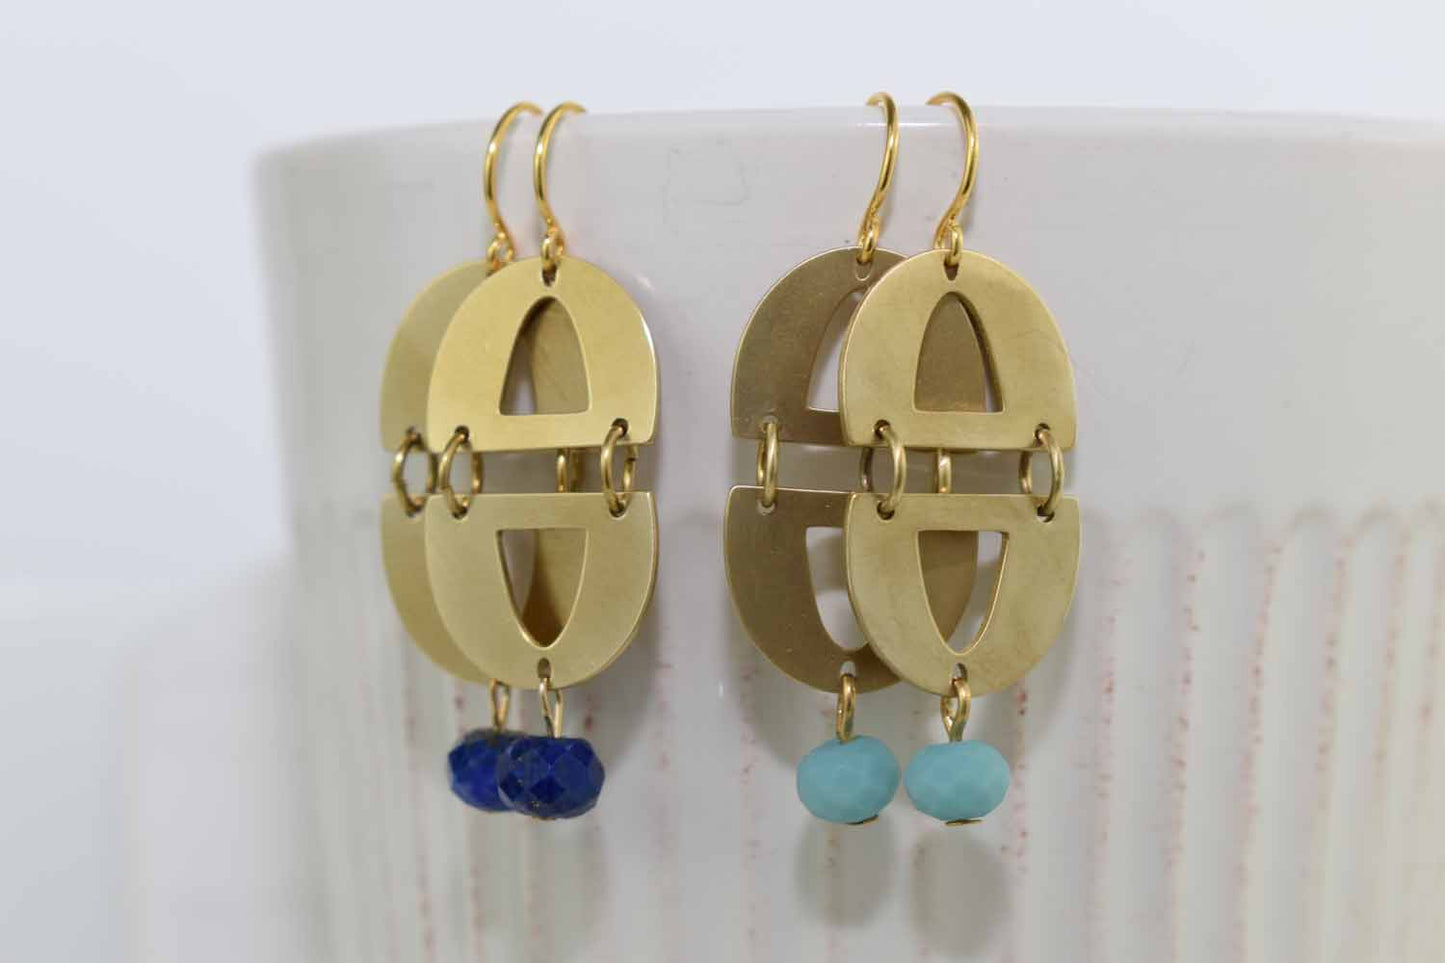 Sky Earrings - Turquoise and Lapis